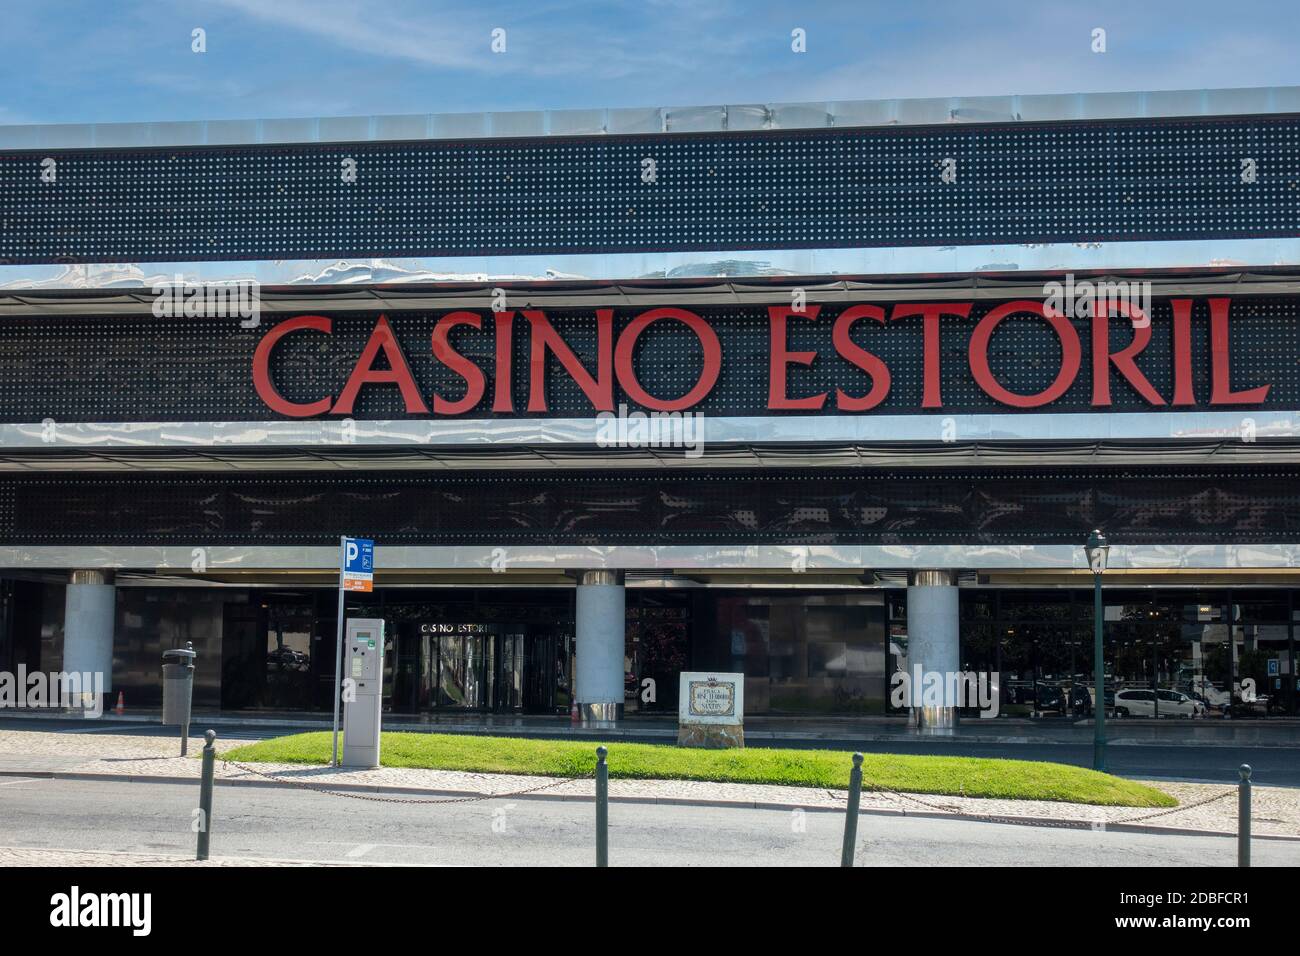 Casino Estoril Sign Estoril Portugal, Estoril Casino Is One Of The Largest Casinos In Europe And Ian Fleming Was Inspired By It For His Casino Royale Stock Photo